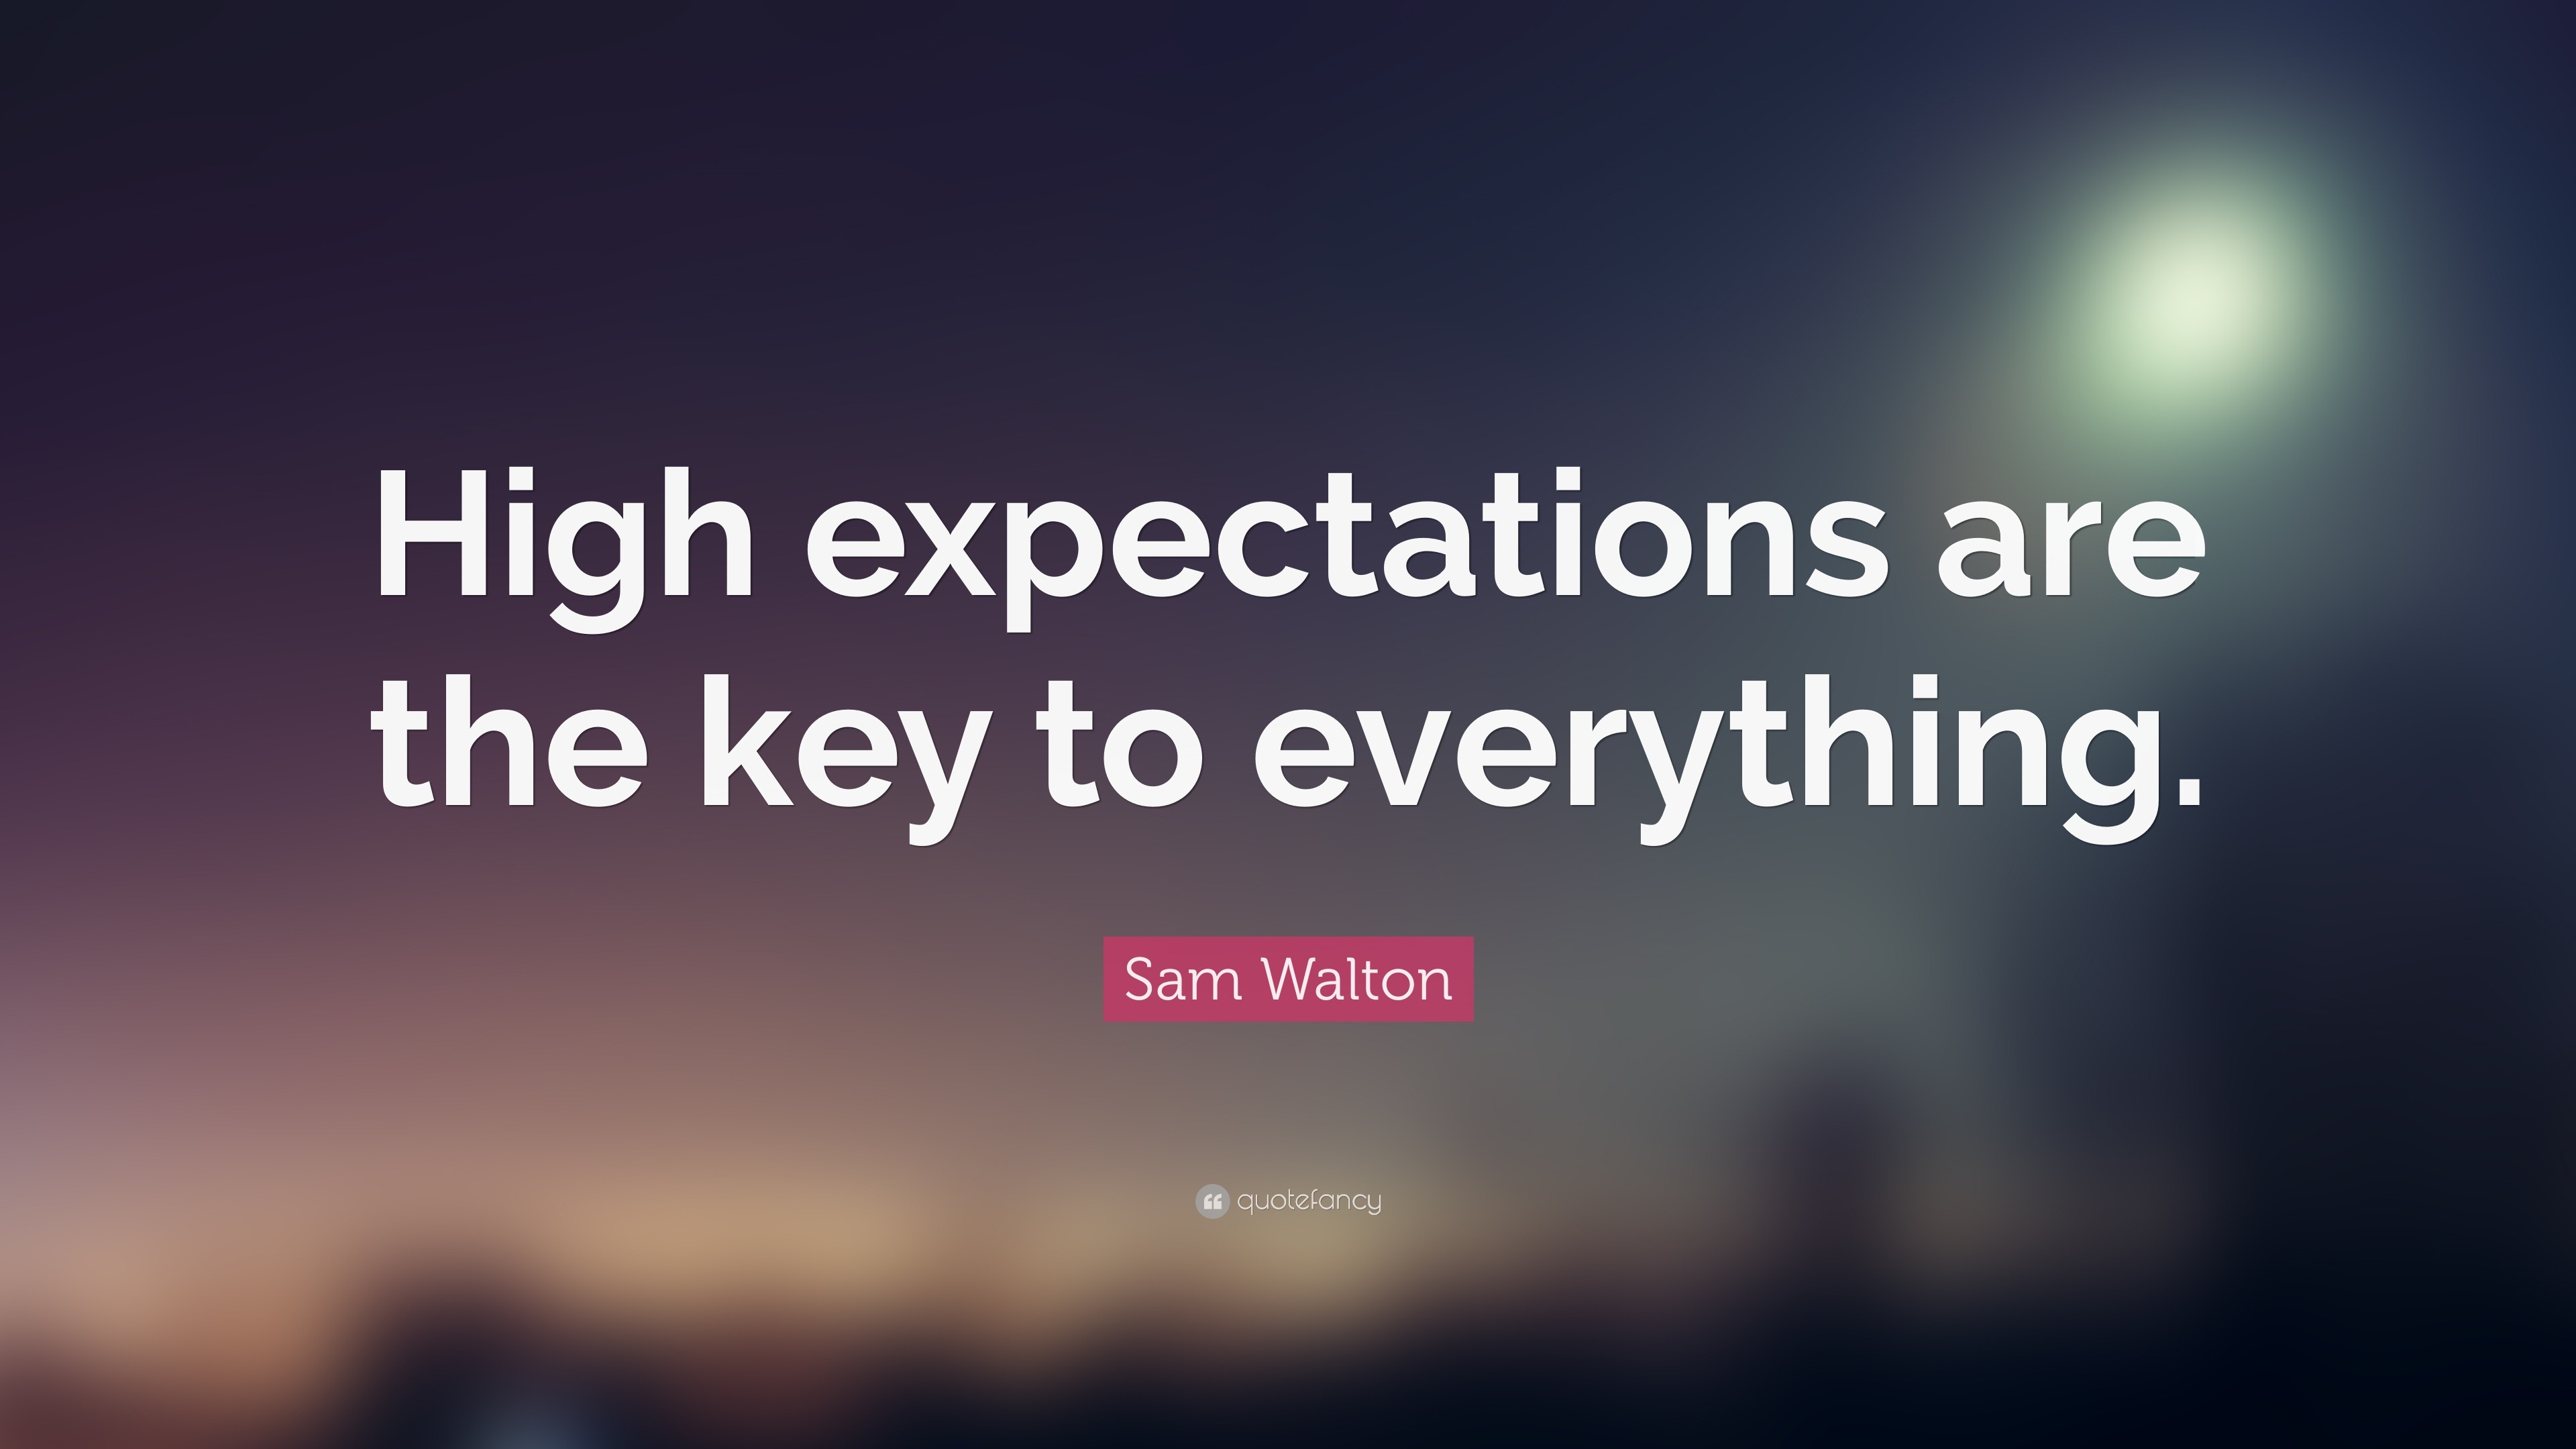 Amazing High Expectations Quotes in the world Learn more here 